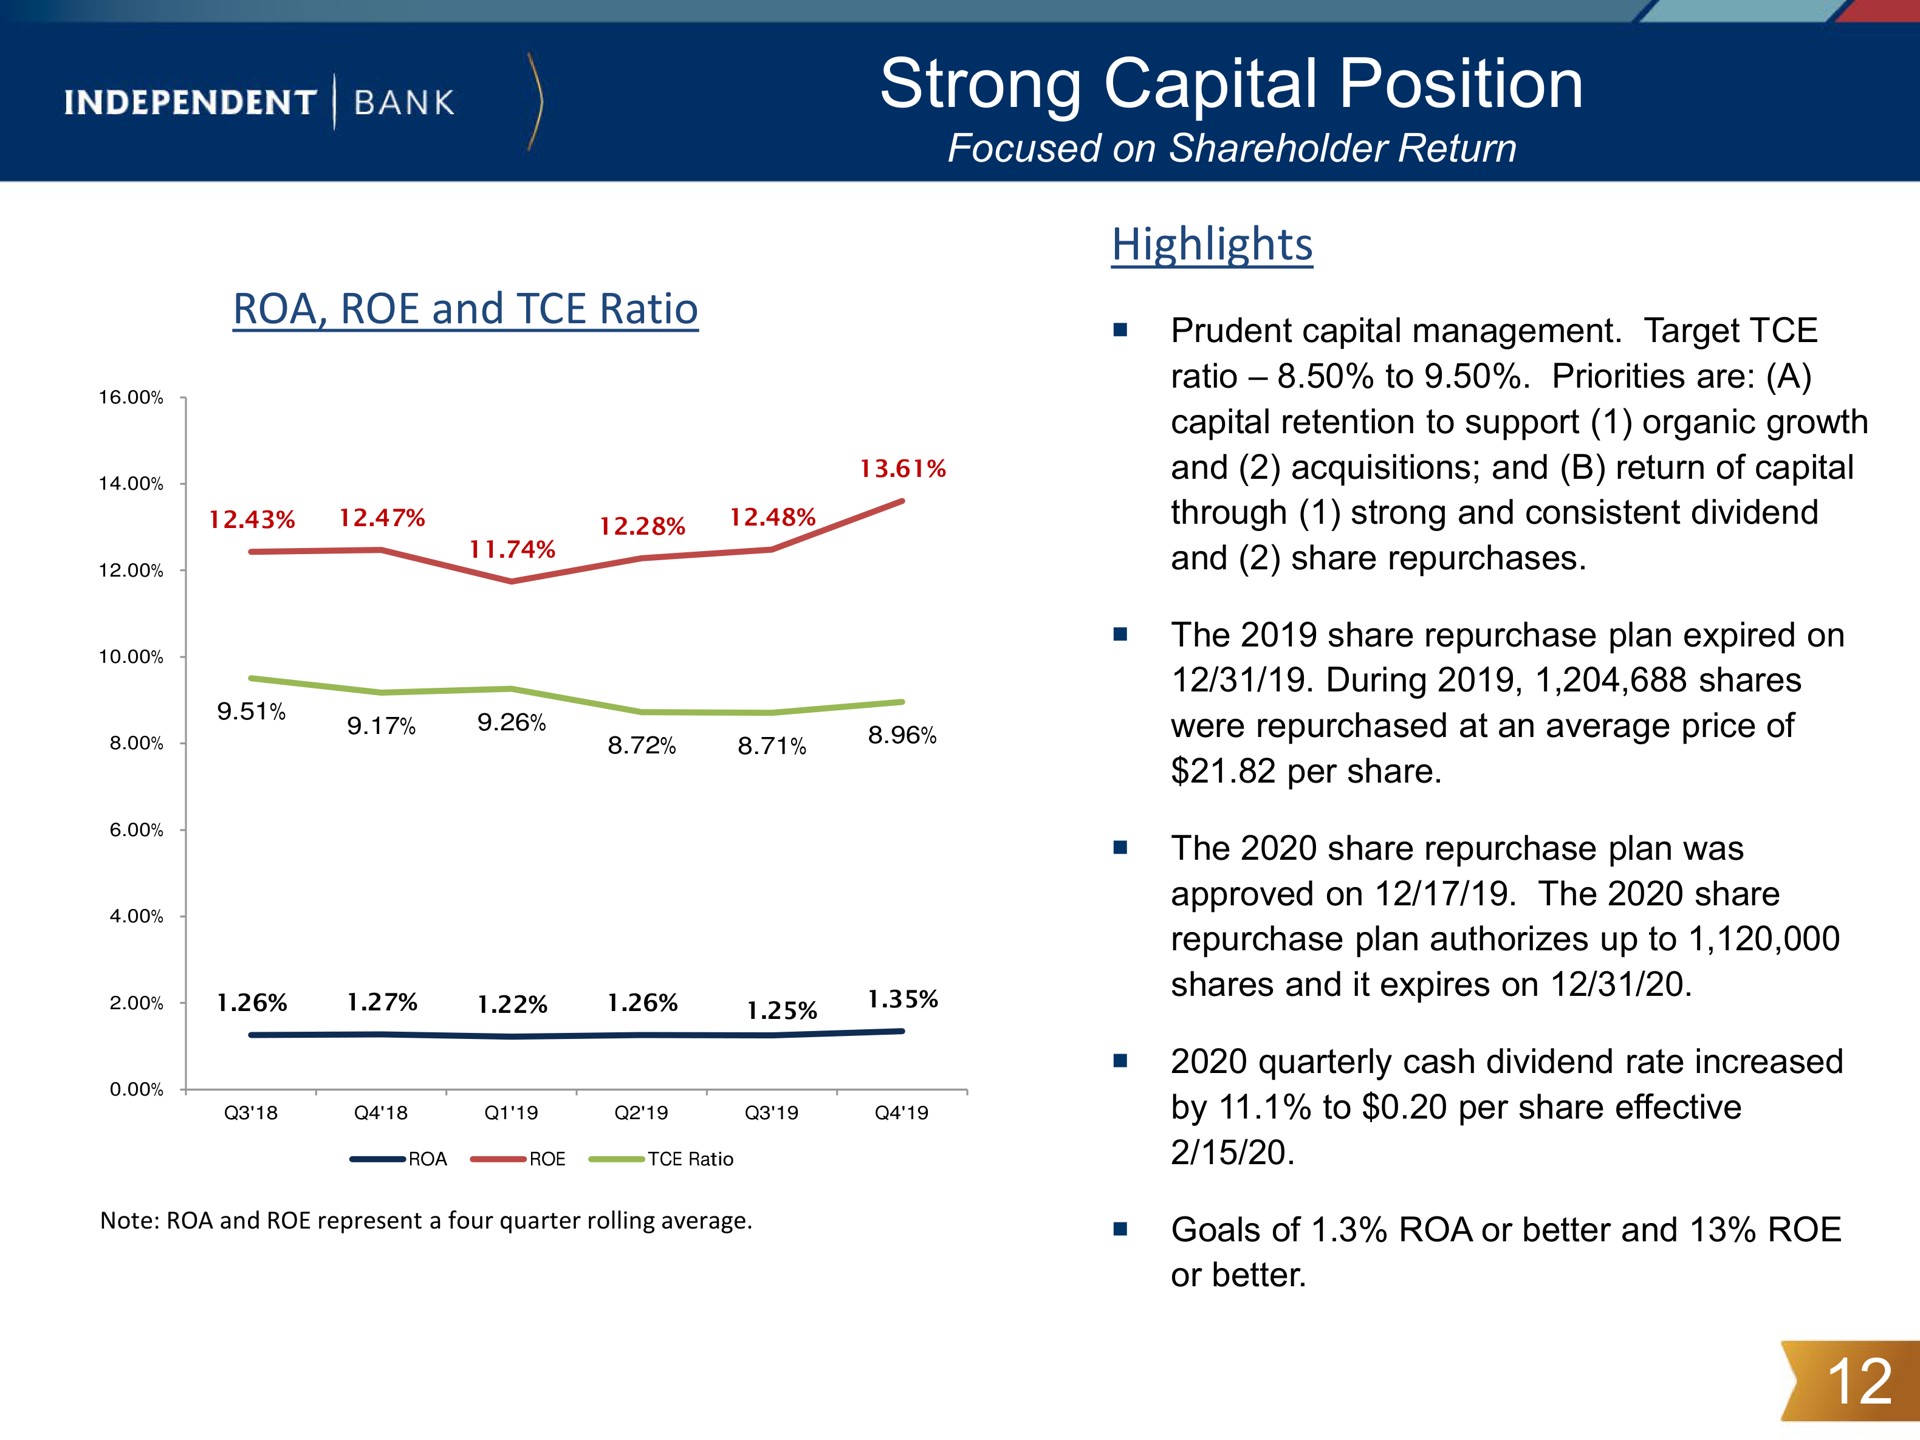 strong capital position | Independent Bank Corp